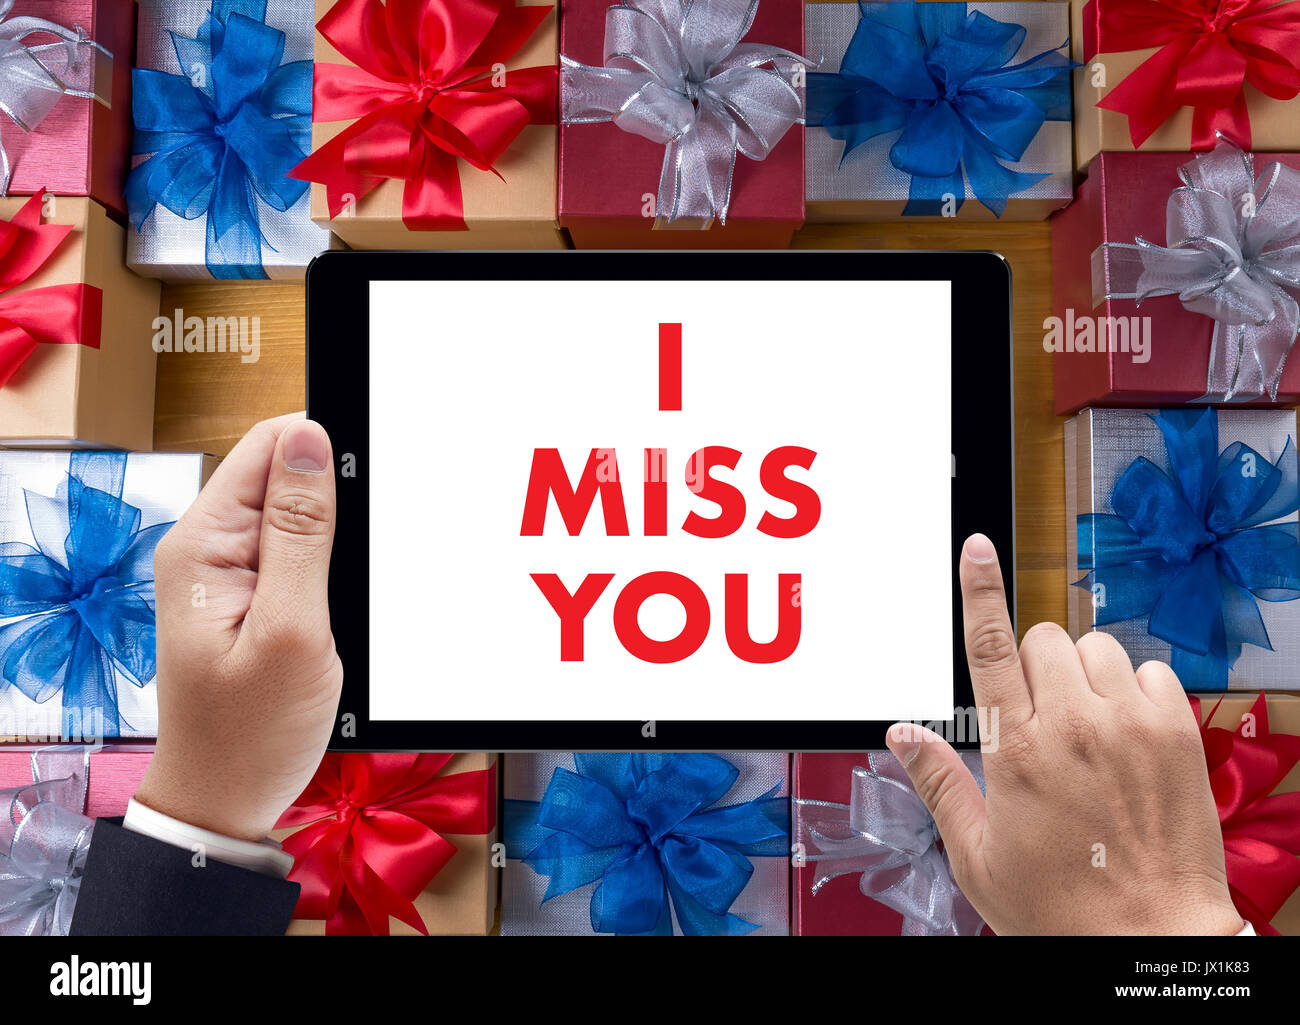 I MISS YOU I Love You too gift Happiness Care Passion Romance ...